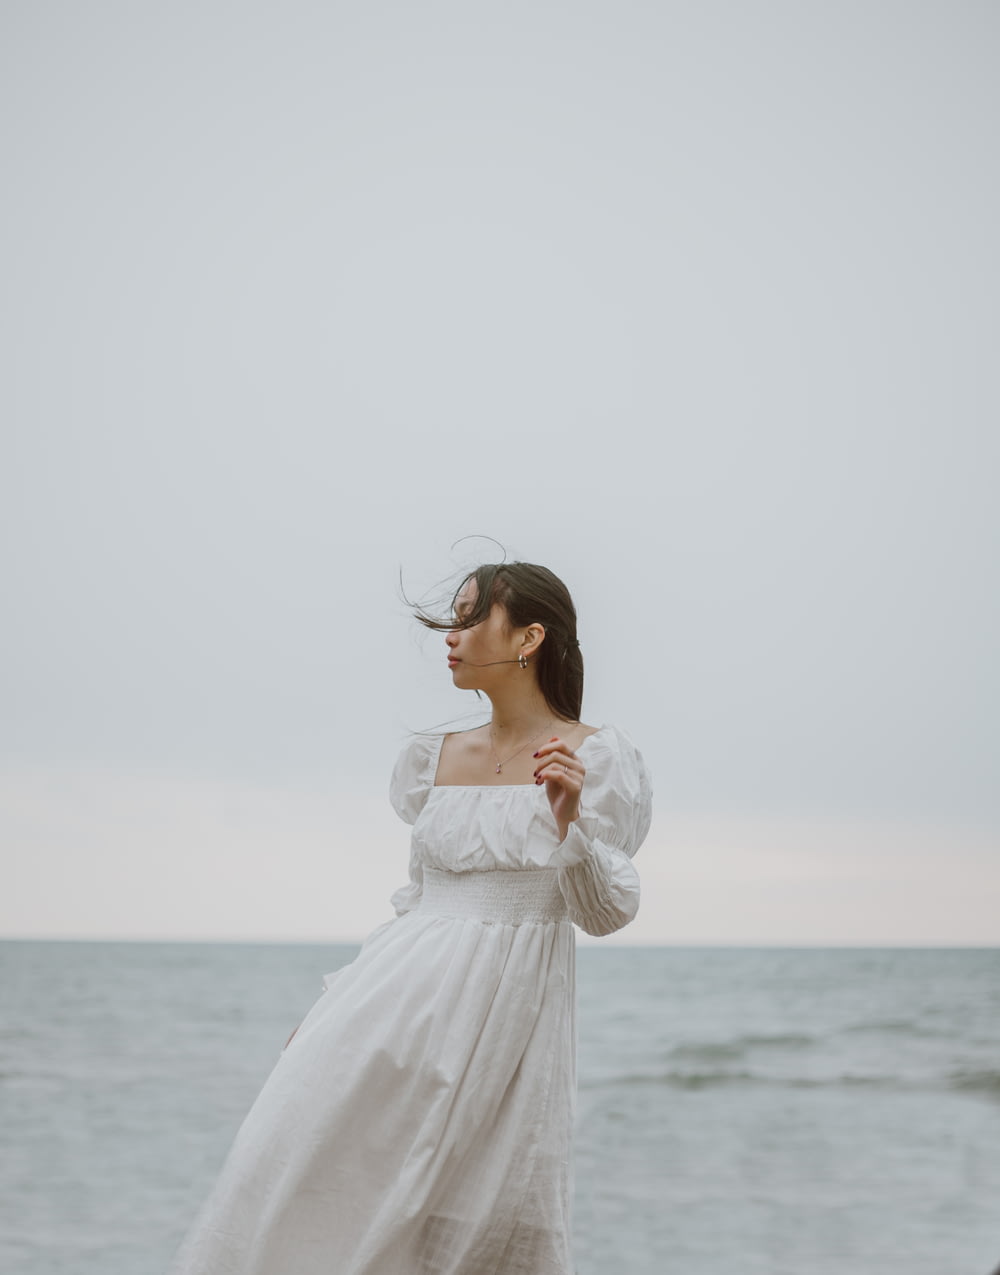 woman in white long sleeve dress standing on seashore during daytime